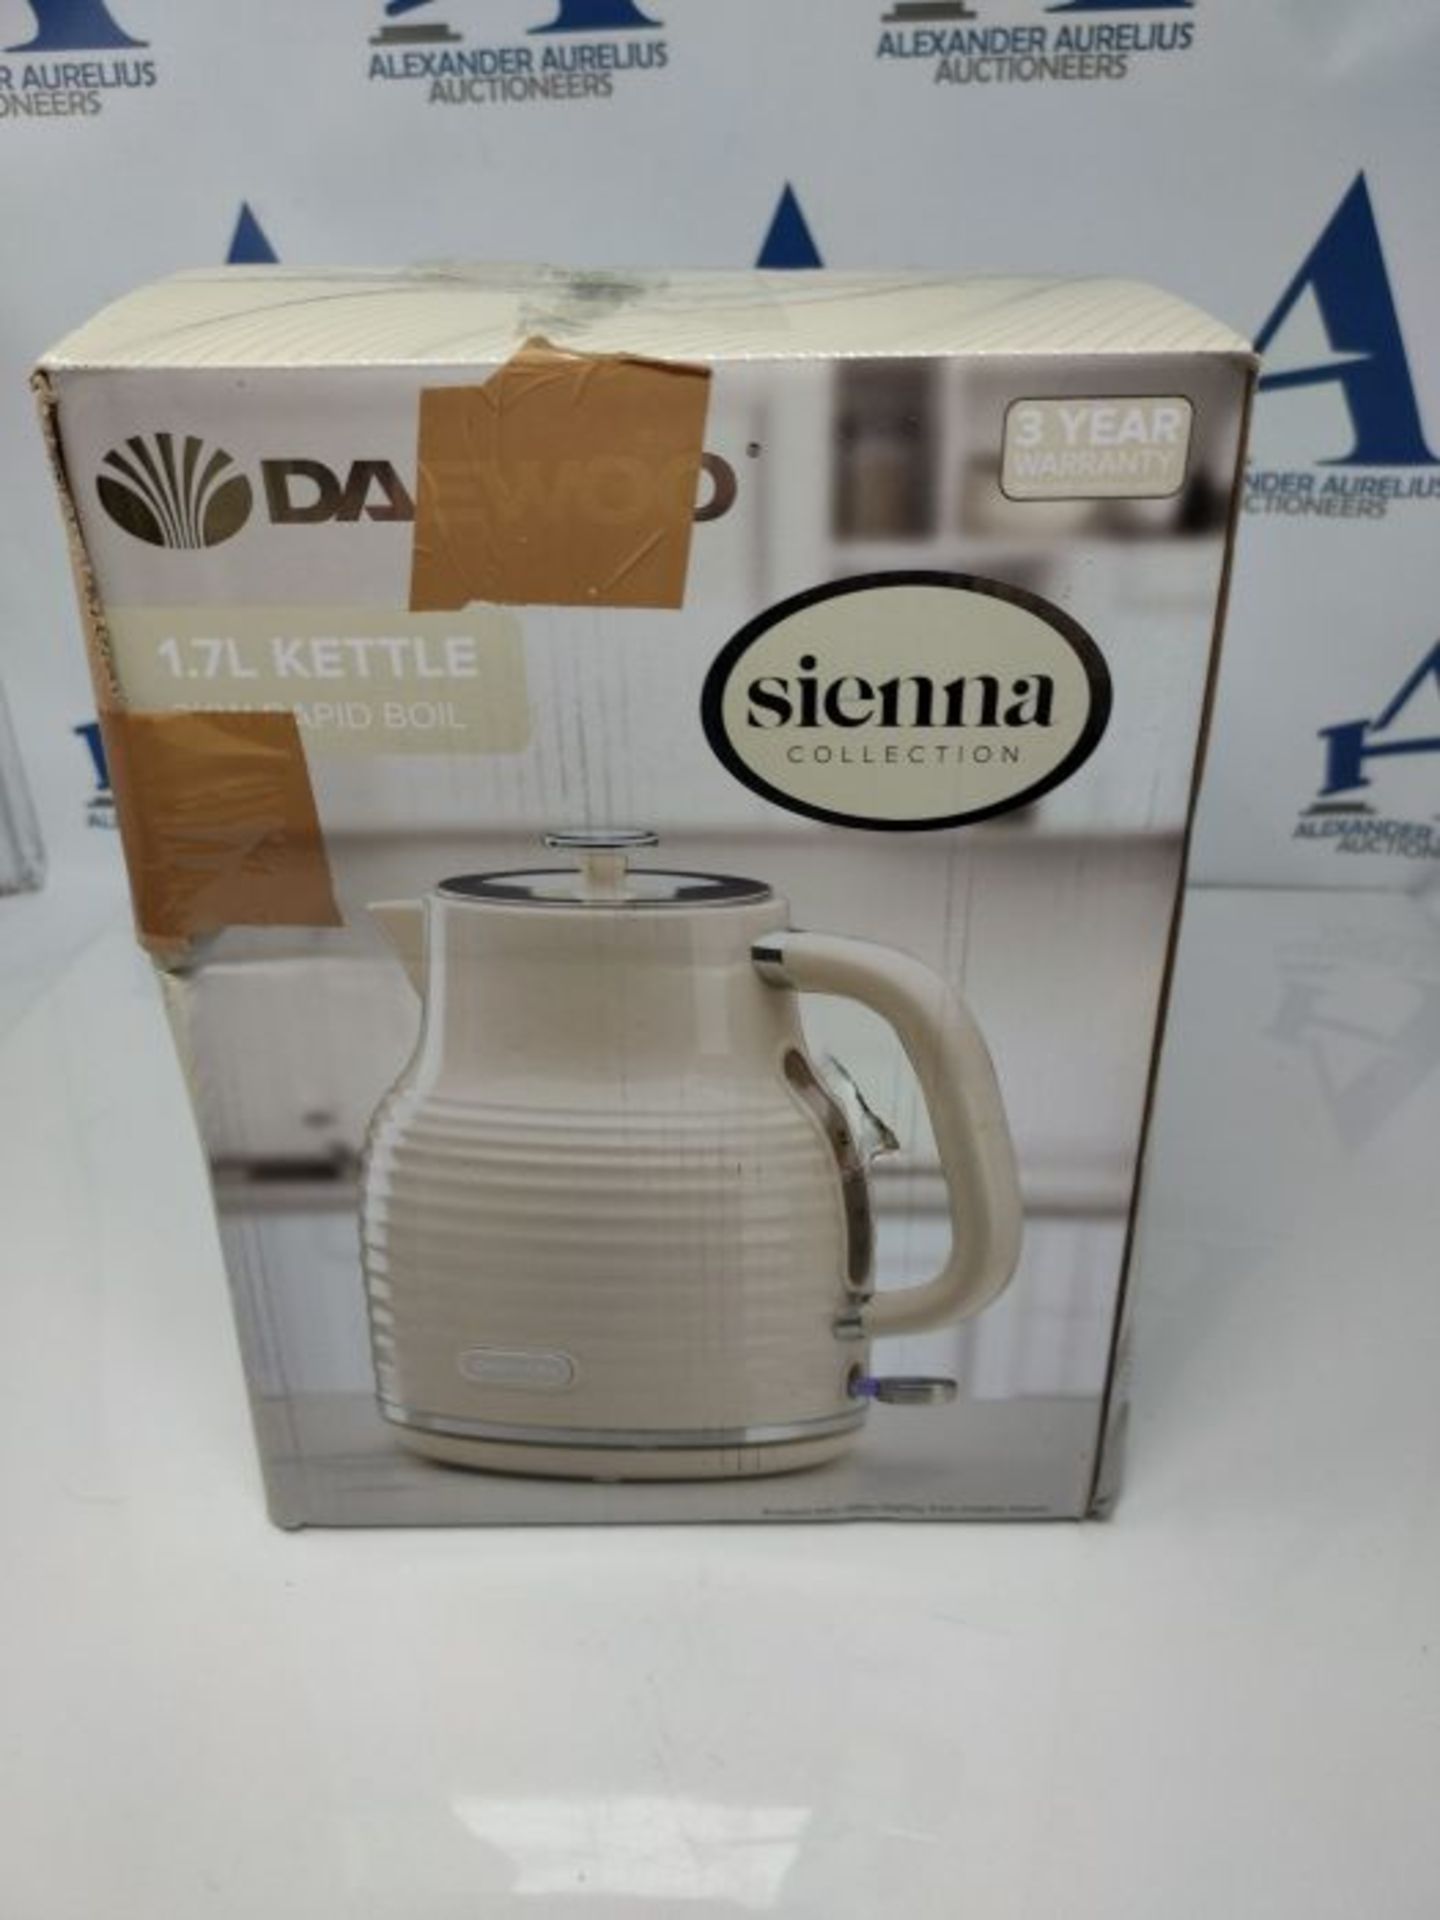 Daewoo Sienna Collection Jug Kettle, Family Sized 1.7 Litre Capacity, Fast Boil, Easy